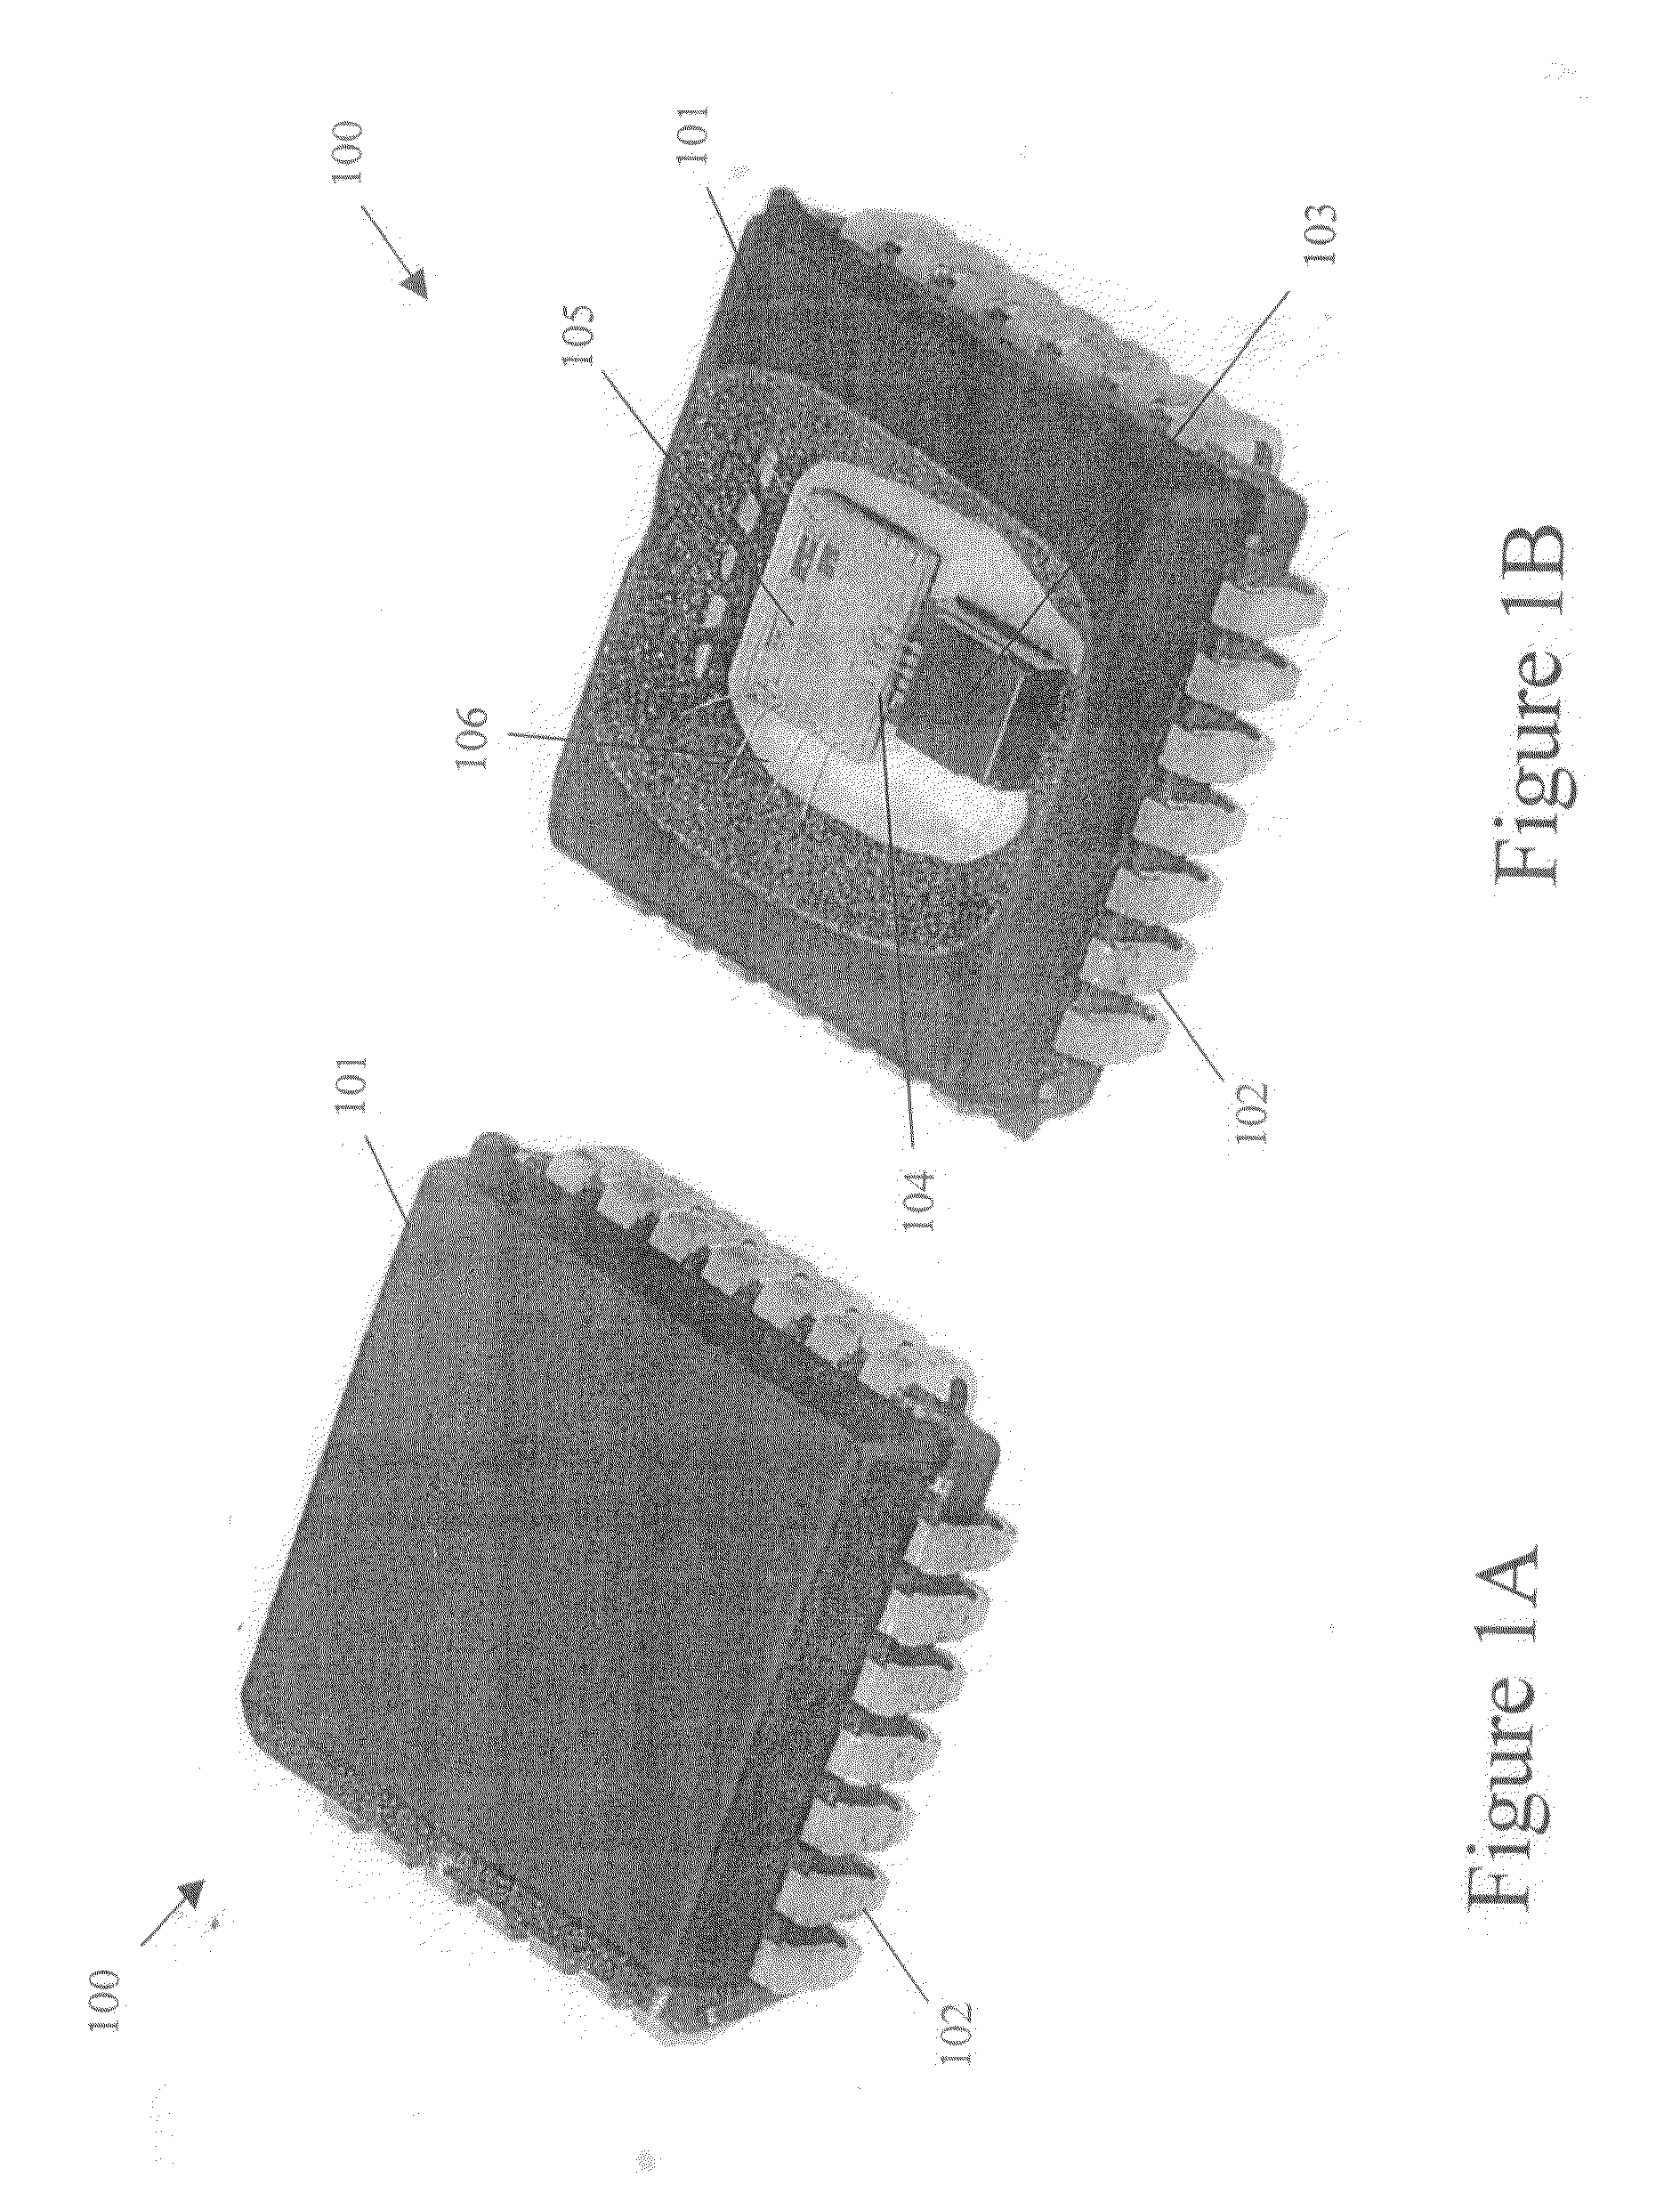 Method for protecting encapsulated sensor structures using stack packaging